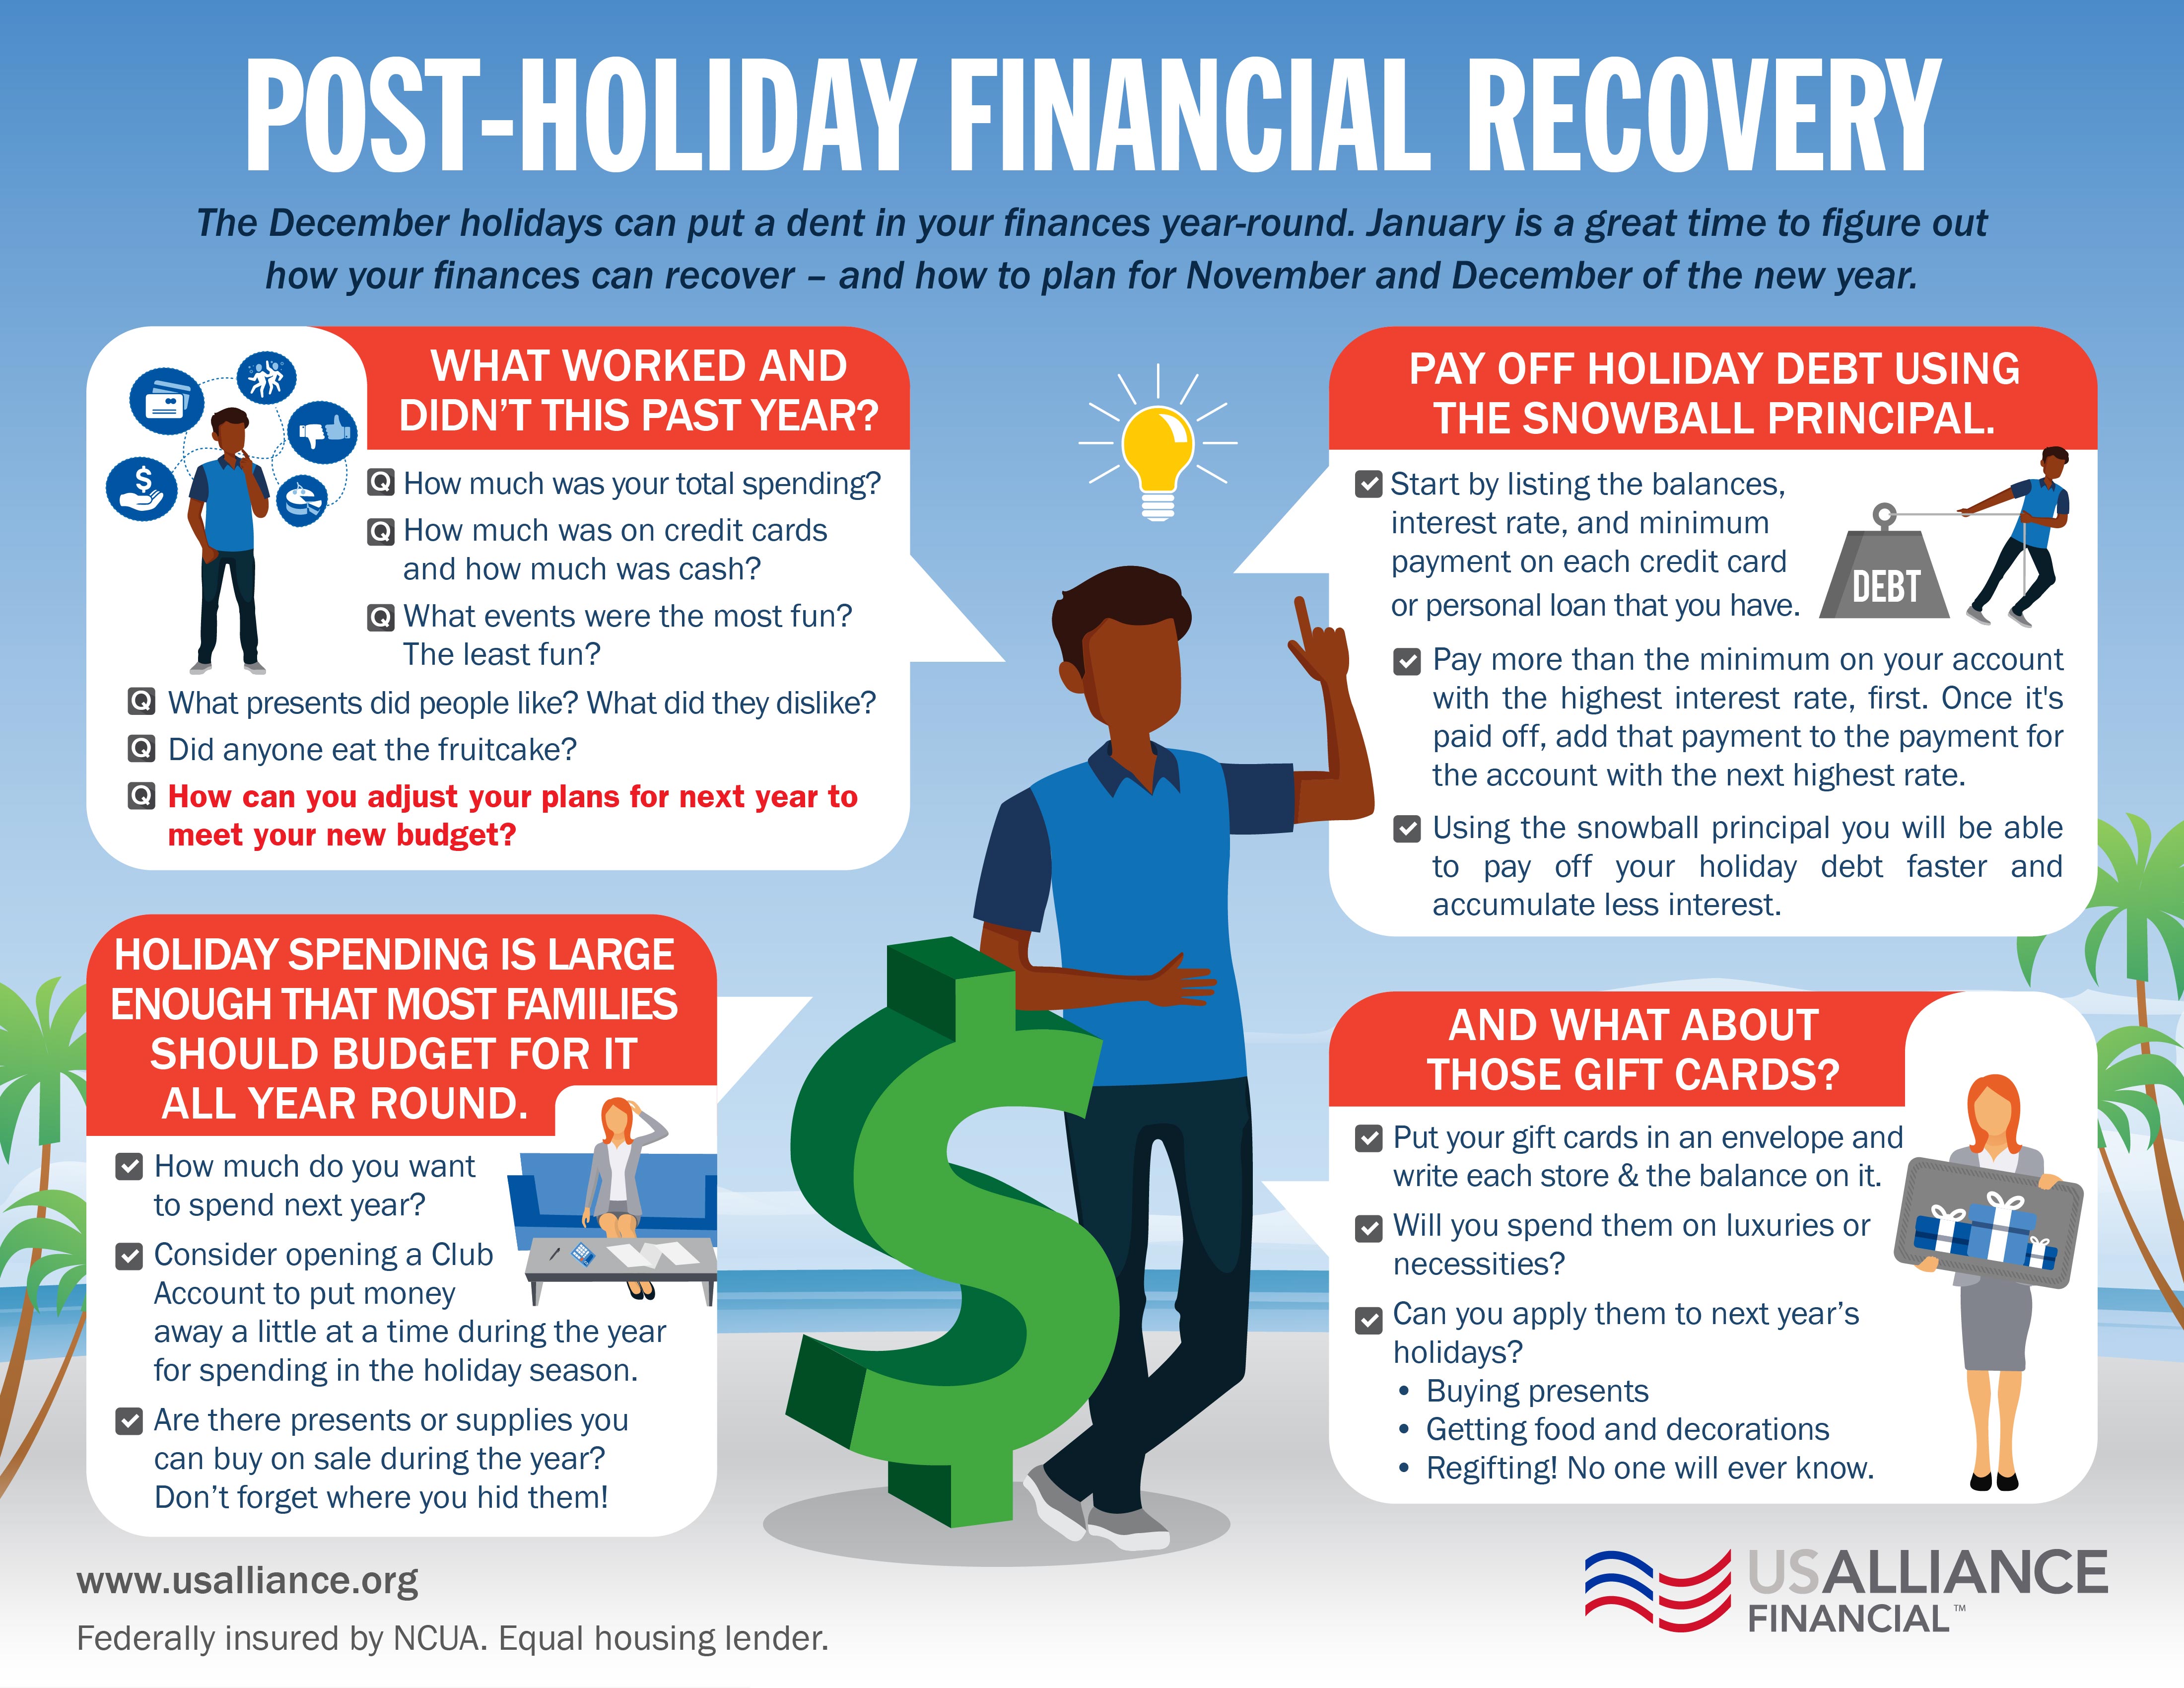 Post-Holiday Financial Recovery